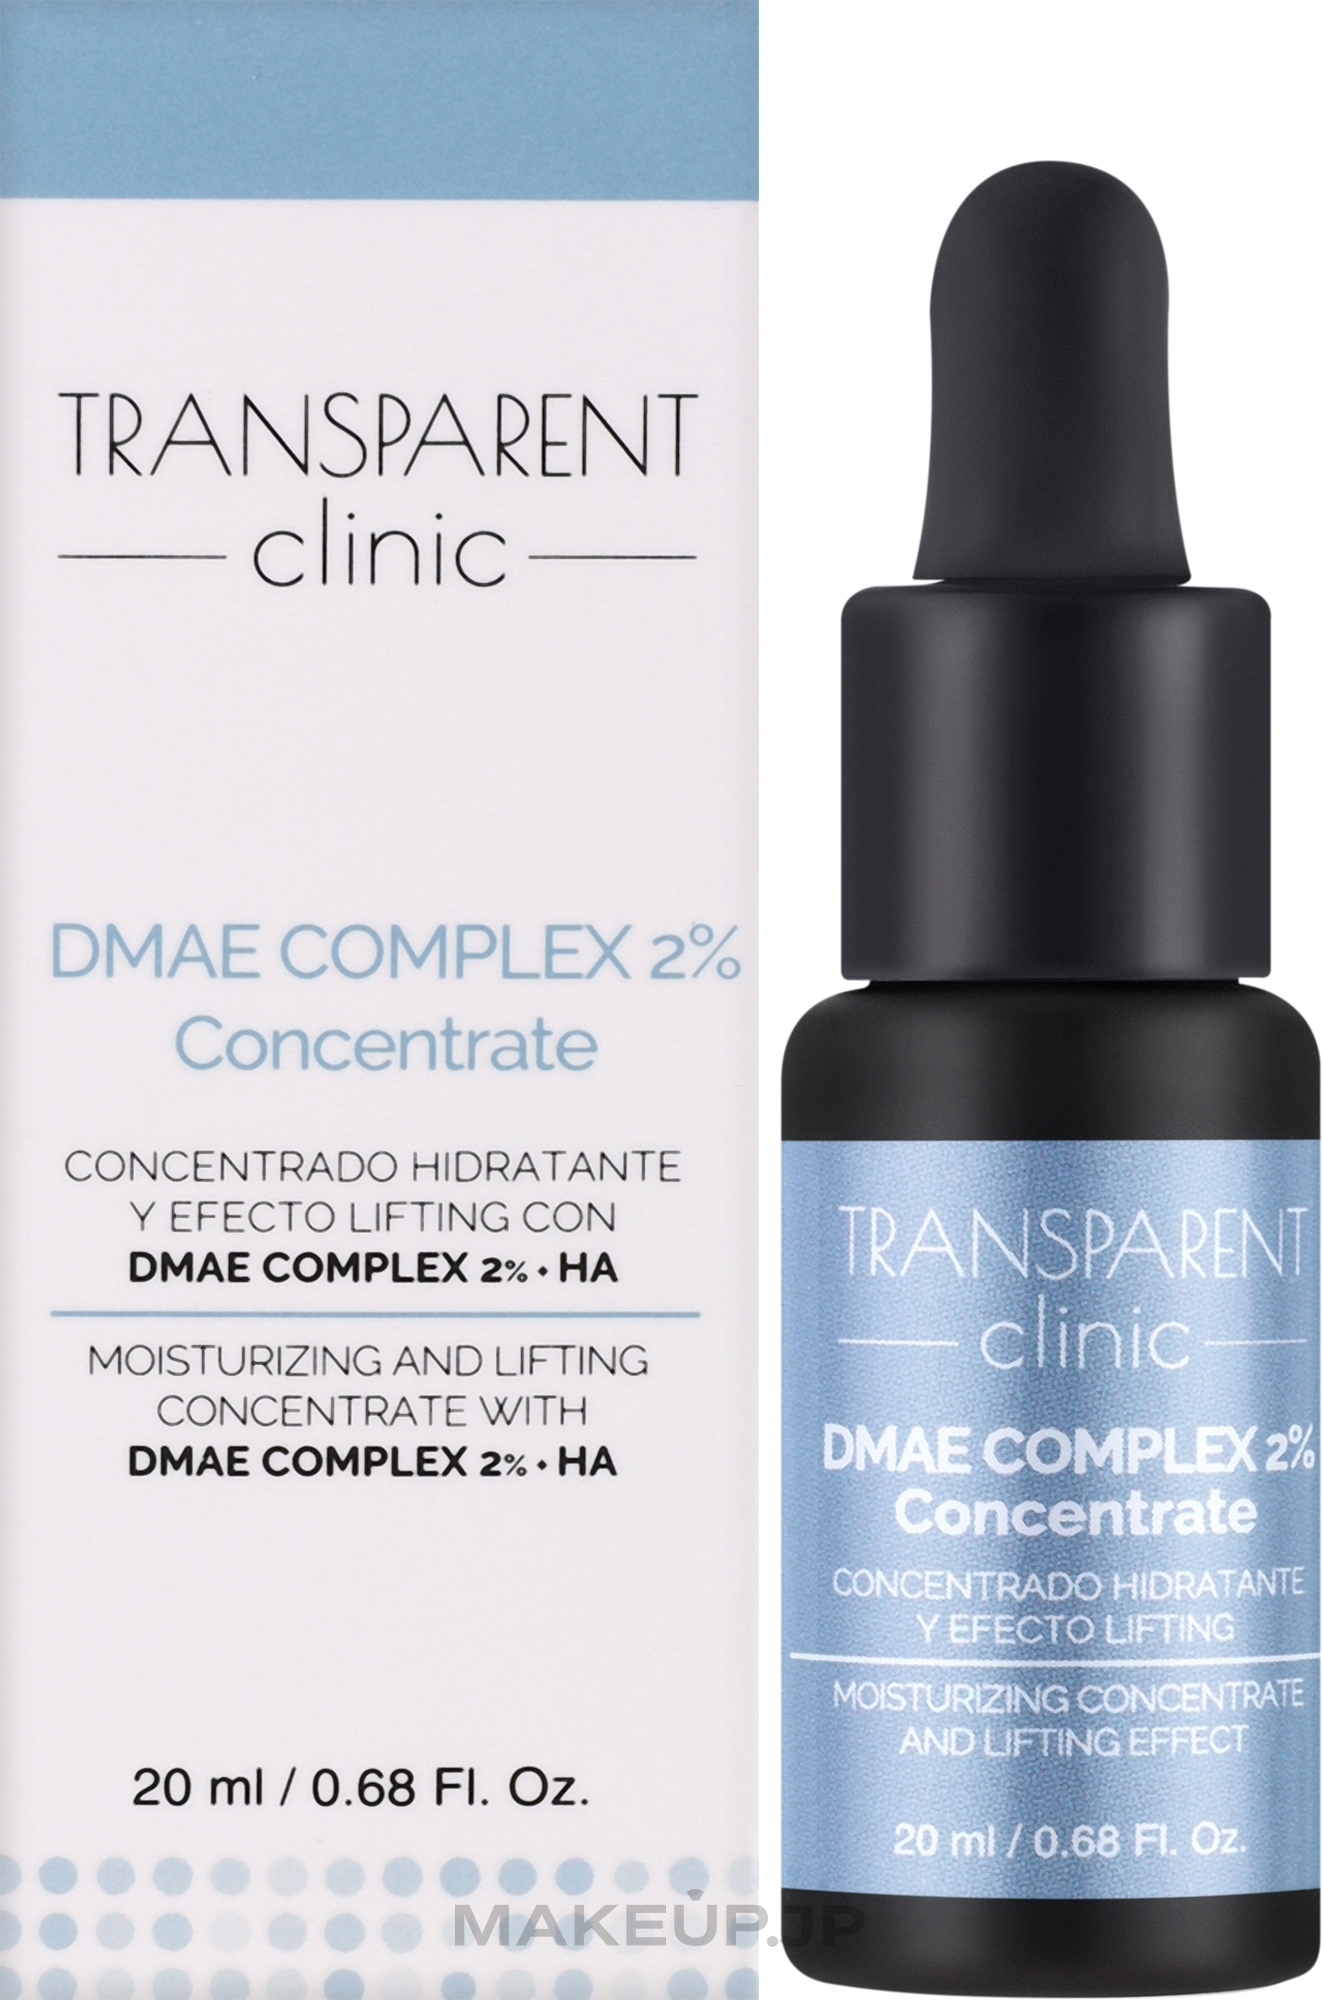 Face Concentrate - Transparent Clinic DMAE Complex 2% Concentrate — photo 20 ml